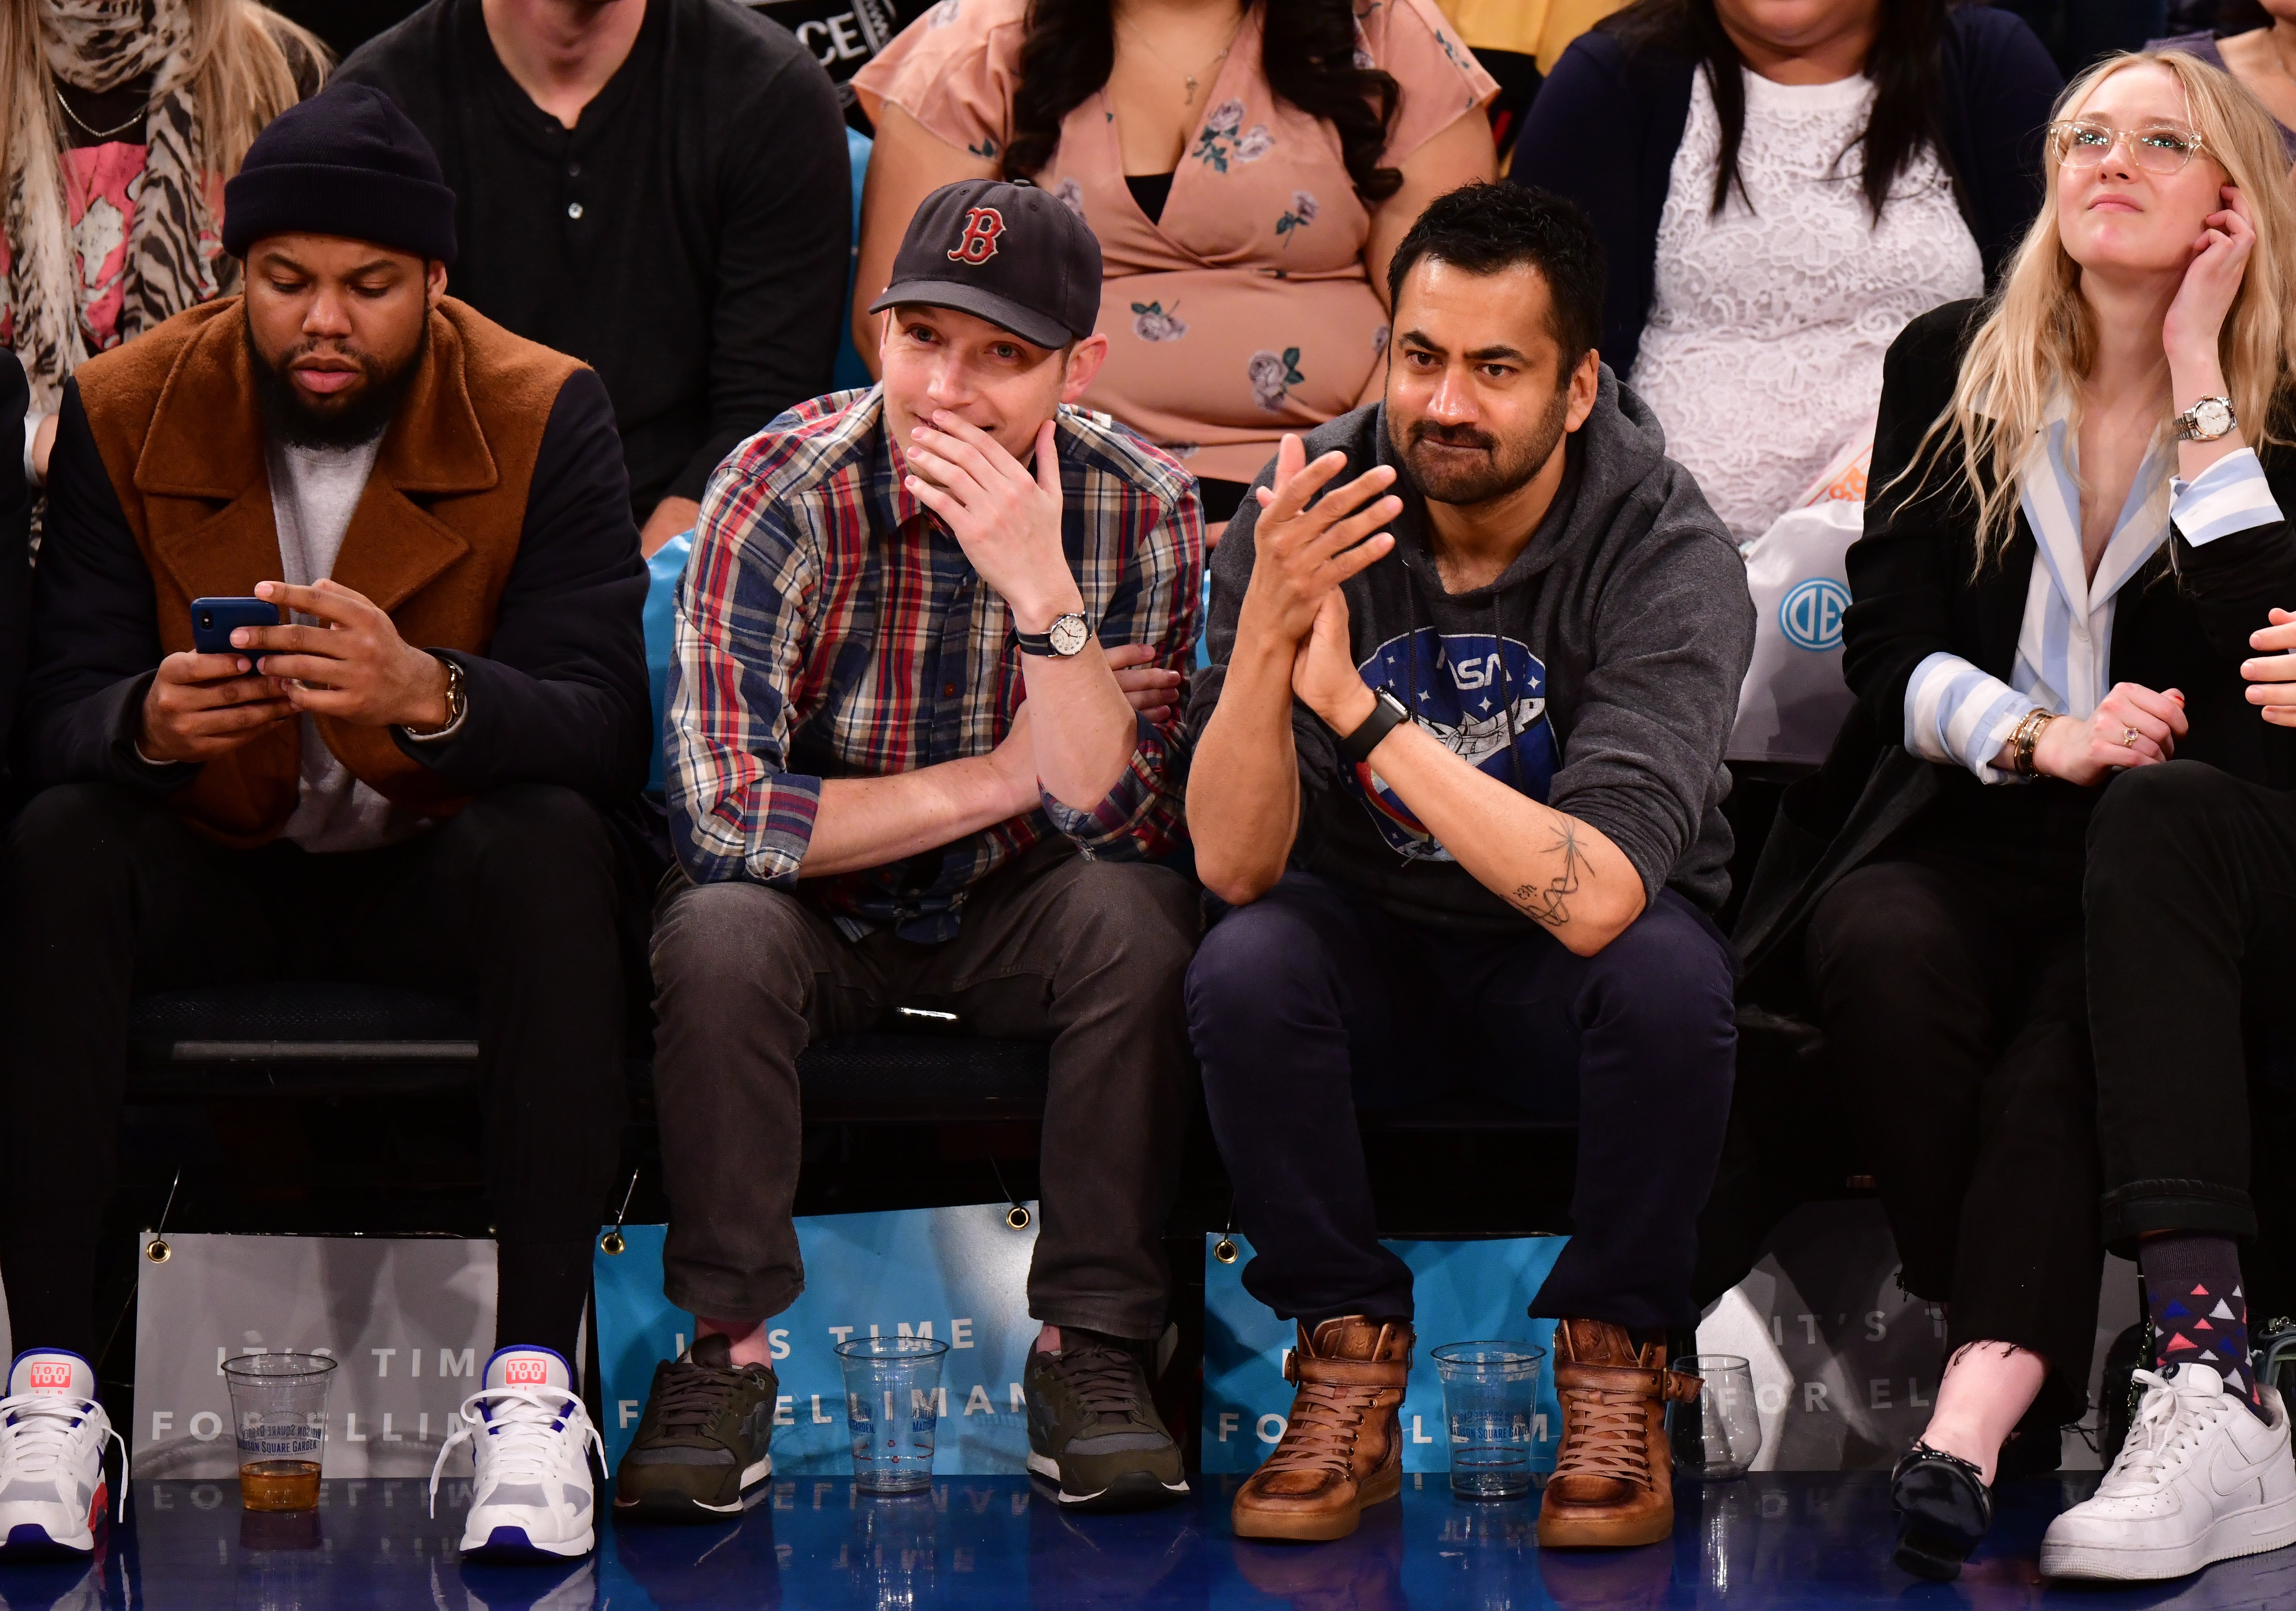 Kal Penn and his rumored fiancé Josh are on the sidelines watching the York Knicks Vs. Detroit Pistons basketball game on March 31, 2018, in New York City. | Source: Getty Images